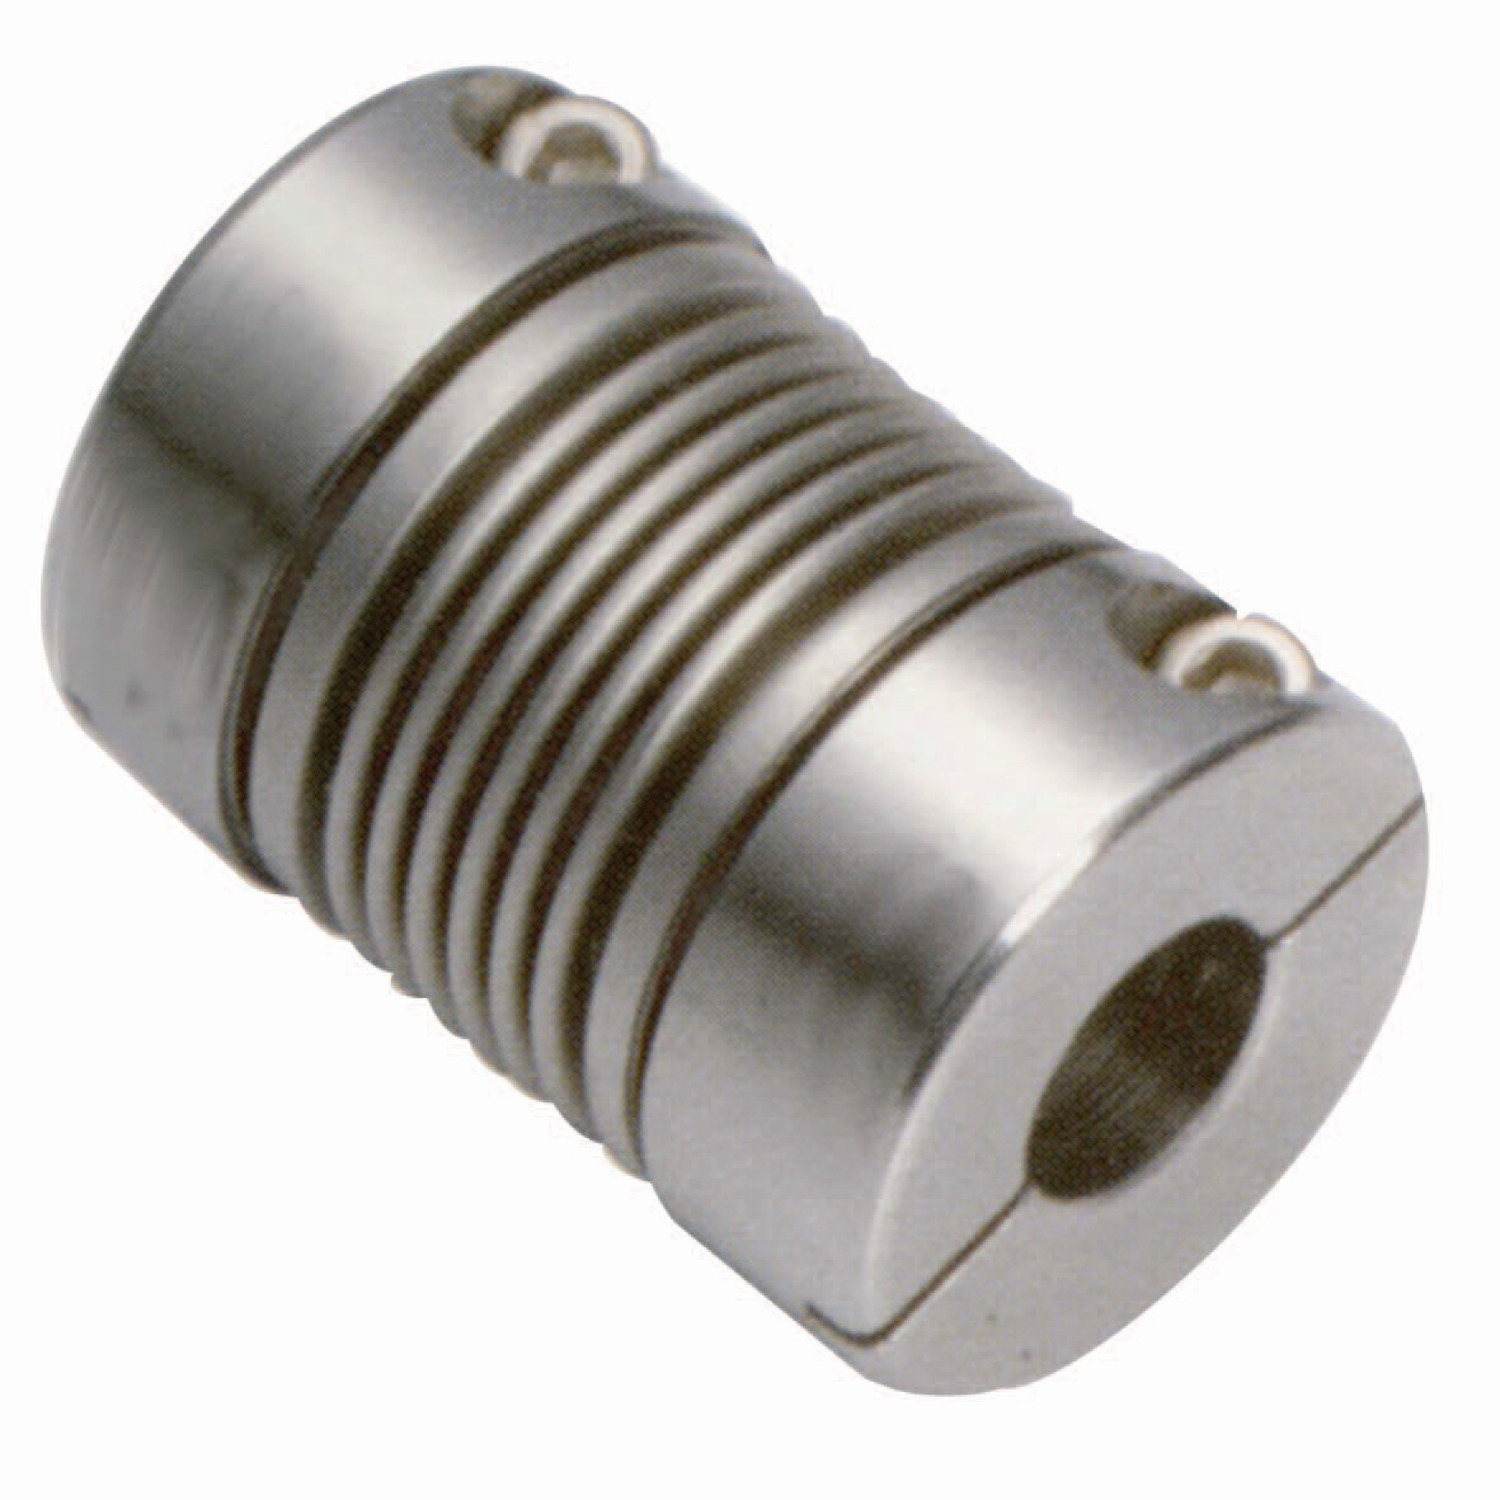 R3010.1 Bellows Coupling - Stainless steel